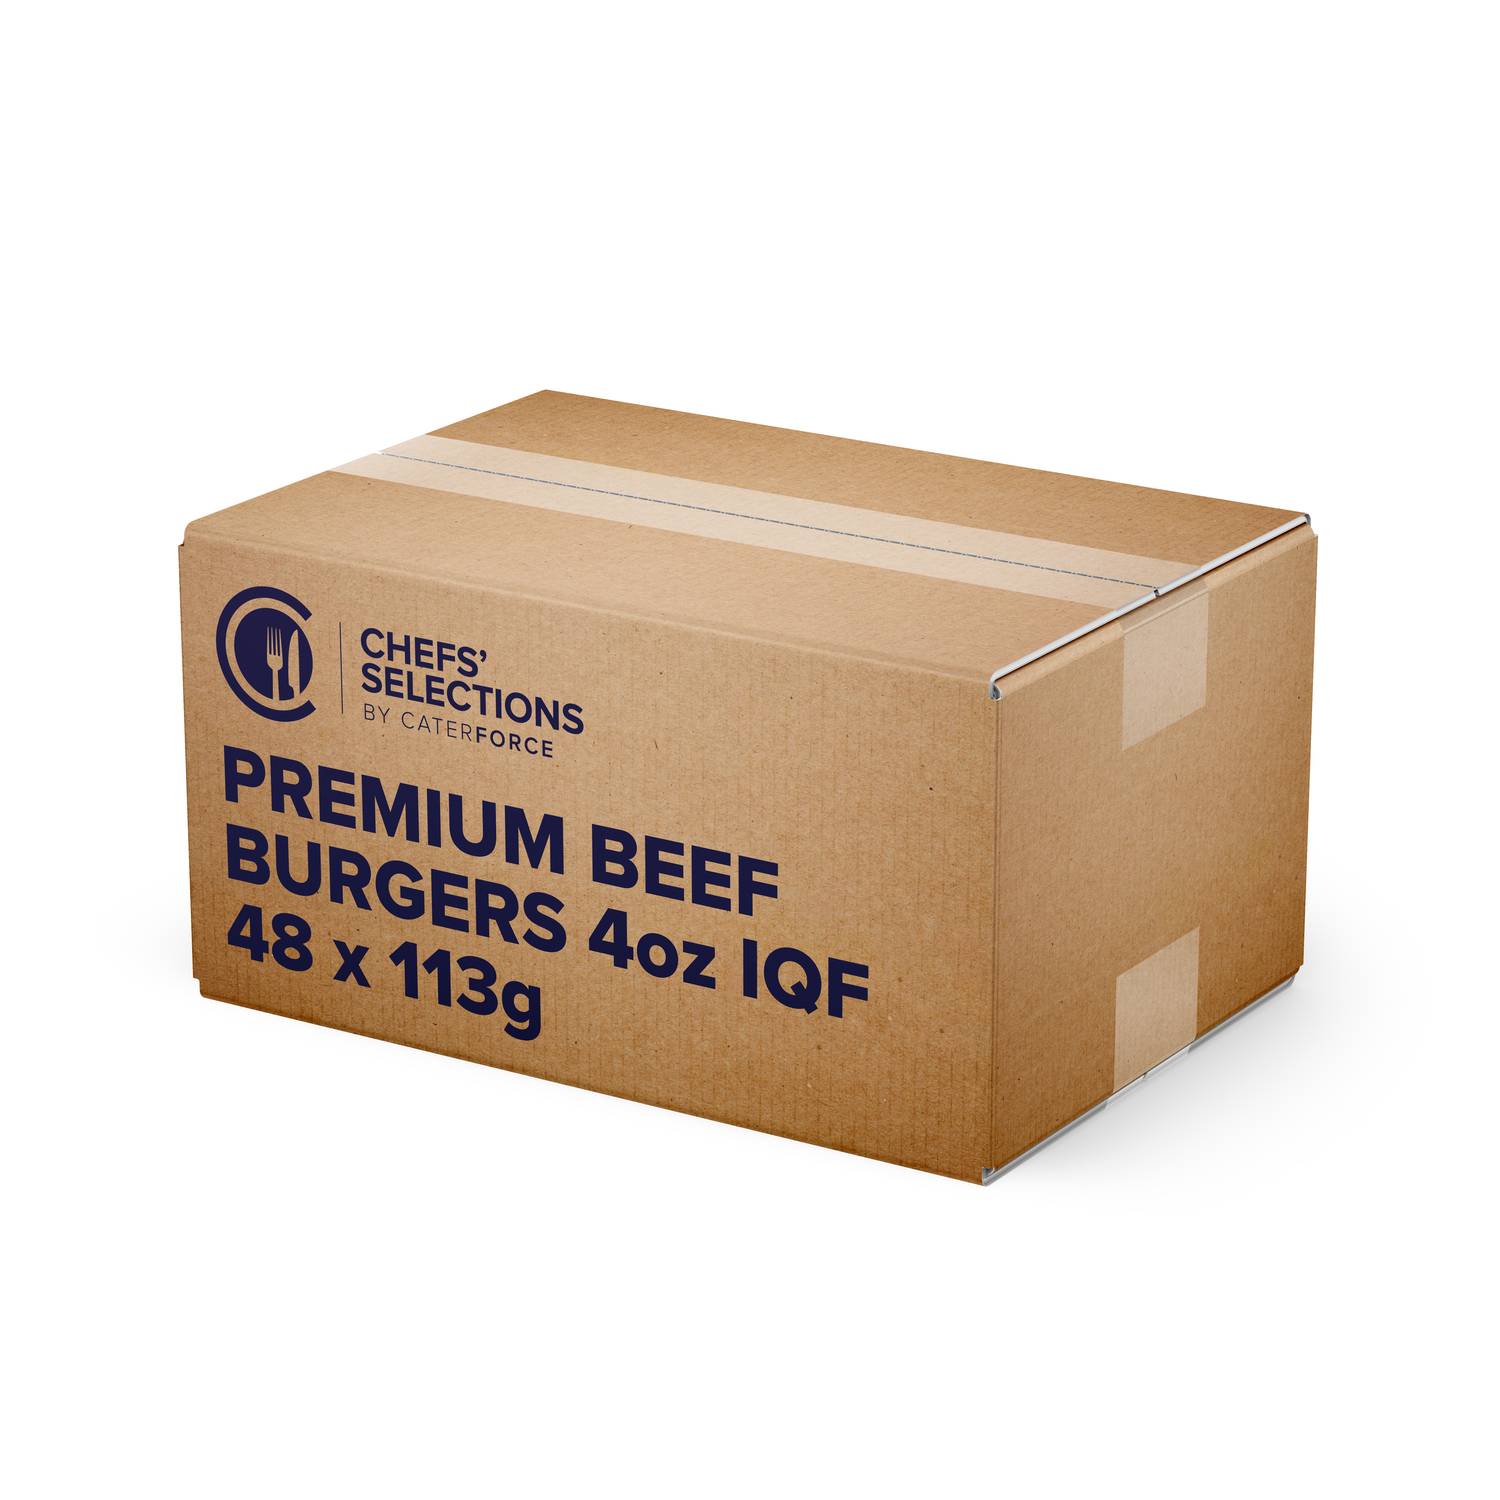 Chefs’ Selections Premium Beef Burger 4oz IQF (48 x 113g)